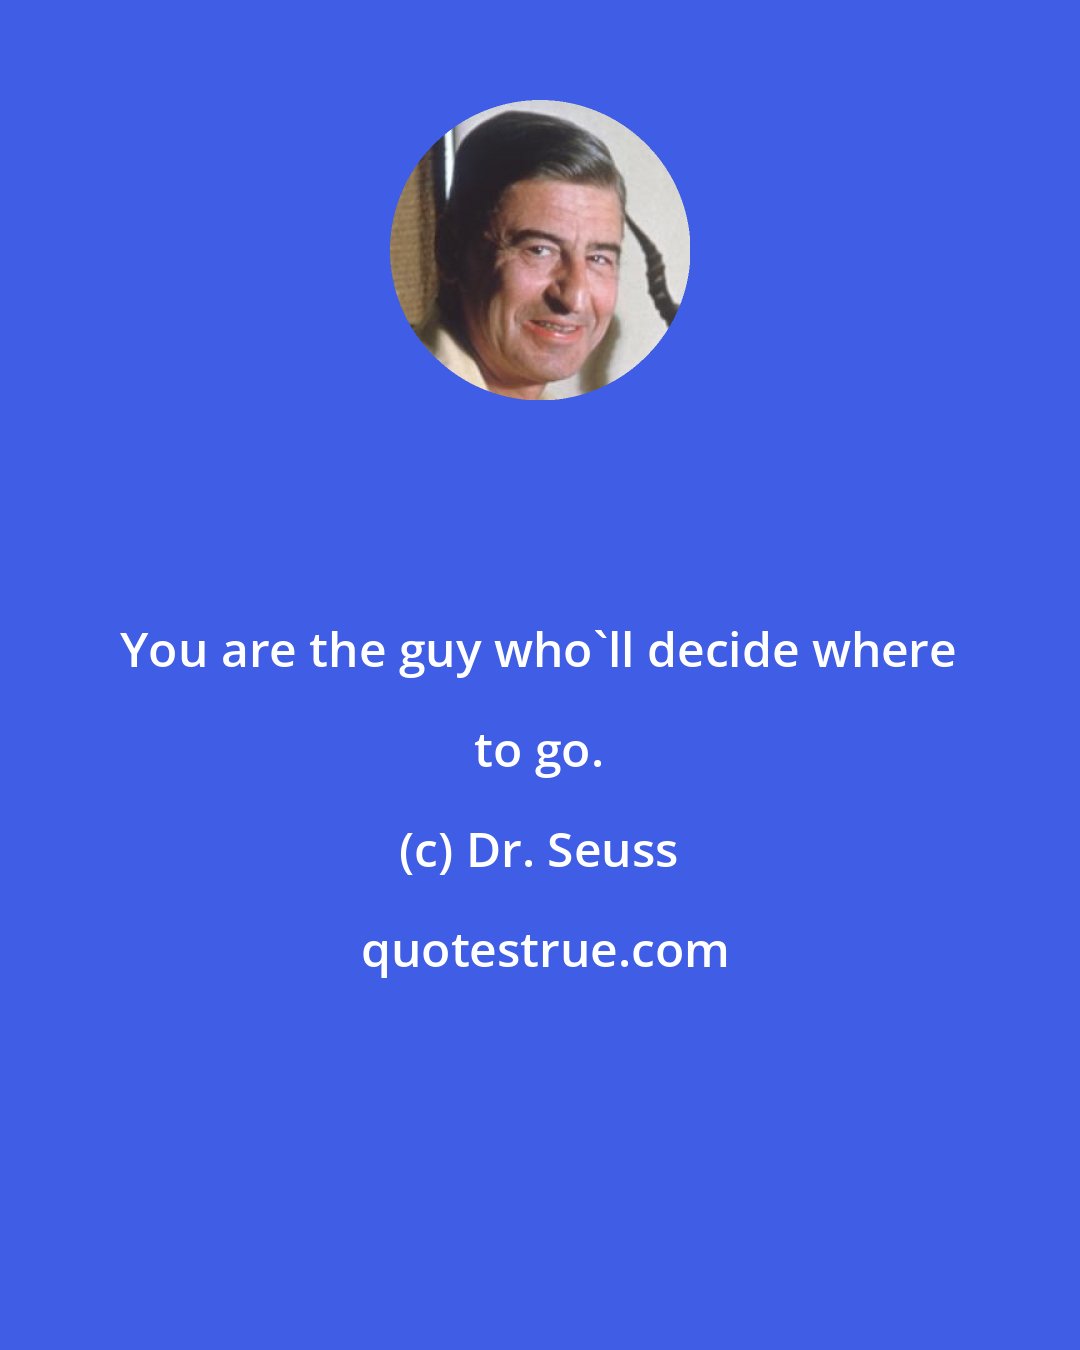 Dr. Seuss: You are the guy who'll decide where to go.